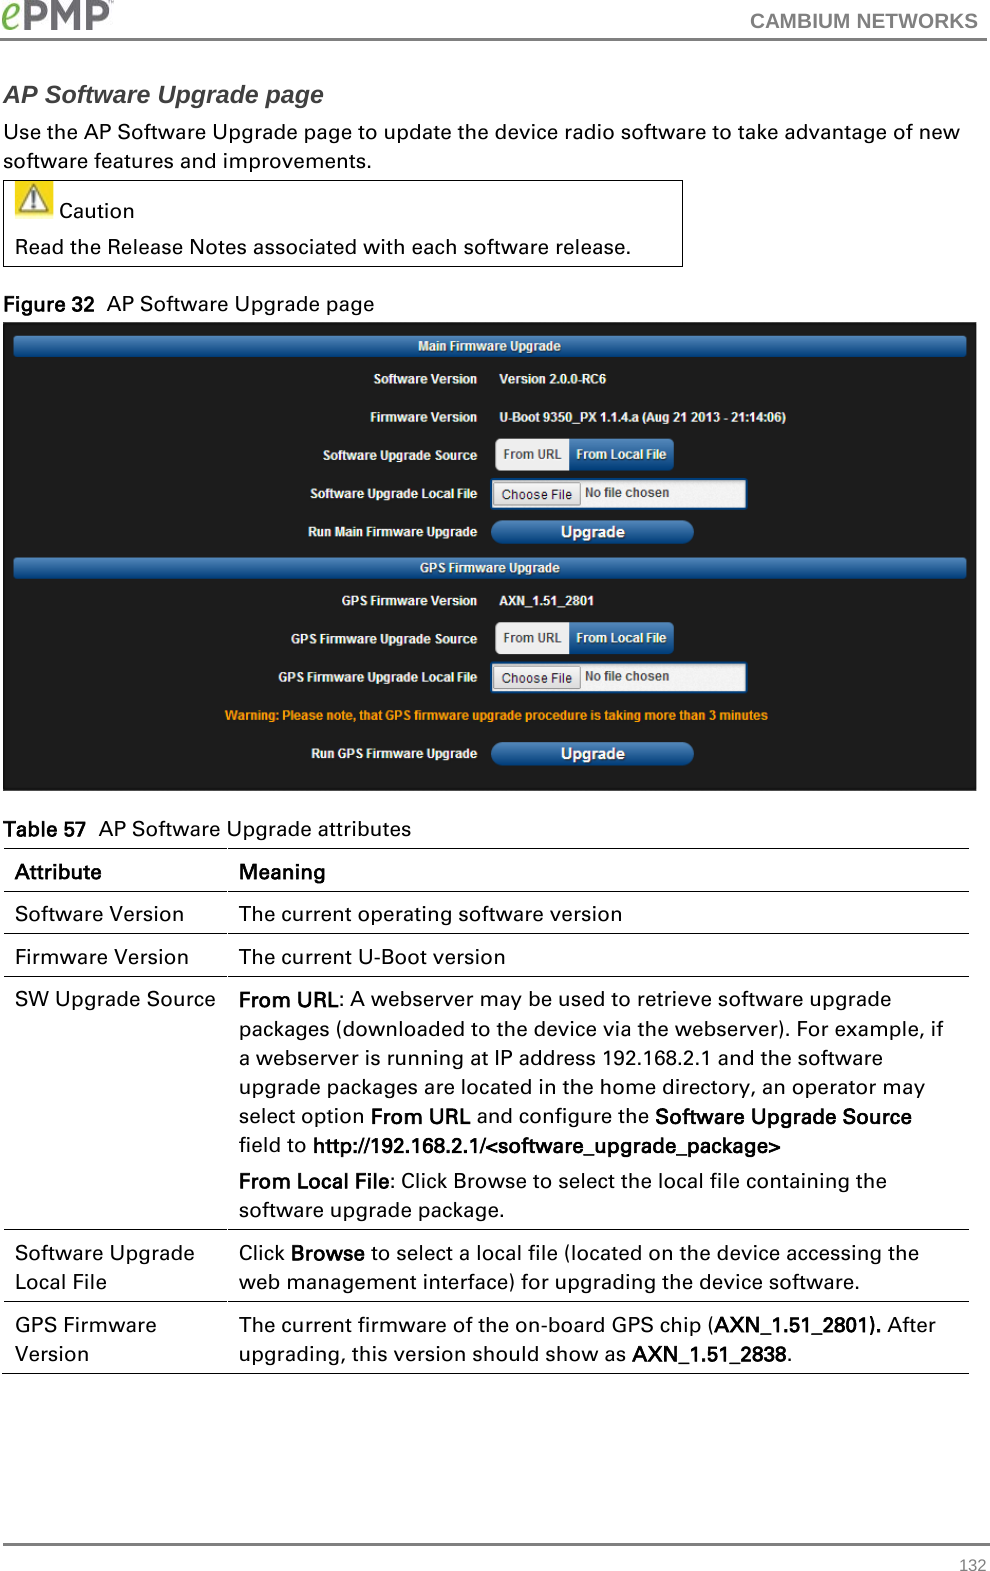 CAMBIUM NETWORKS  AP Software Upgrade page Use the AP Software Upgrade page to update the device radio software to take advantage of new software features and improvements.  Caution Read the Release Notes associated with each software release.   Figure 32  AP Software Upgrade page  Table 57  AP Software Upgrade attributes Attribute Meaning Software Version The current operating software version Firmware Version The current U-Boot version SW Upgrade Source From URL: A webserver may be used to retrieve software upgrade packages (downloaded to the device via the webserver). For example, if a webserver is running at IP address 192.168.2.1 and the software upgrade packages are located in the home directory, an operator may select option From URL and configure the Software Upgrade Source field to http://192.168.2.1/&lt;software_upgrade_package&gt; From Local File: Click Browse to select the local file containing the software upgrade package. Software Upgrade Local File Click Browse to select a local file (located on the device accessing the web management interface) for upgrading the device software. GPS Firmware Version The current firmware of the on-board GPS chip (AXN_1.51_2801). After upgrading, this version should show as AXN_1.51_2838.  132 